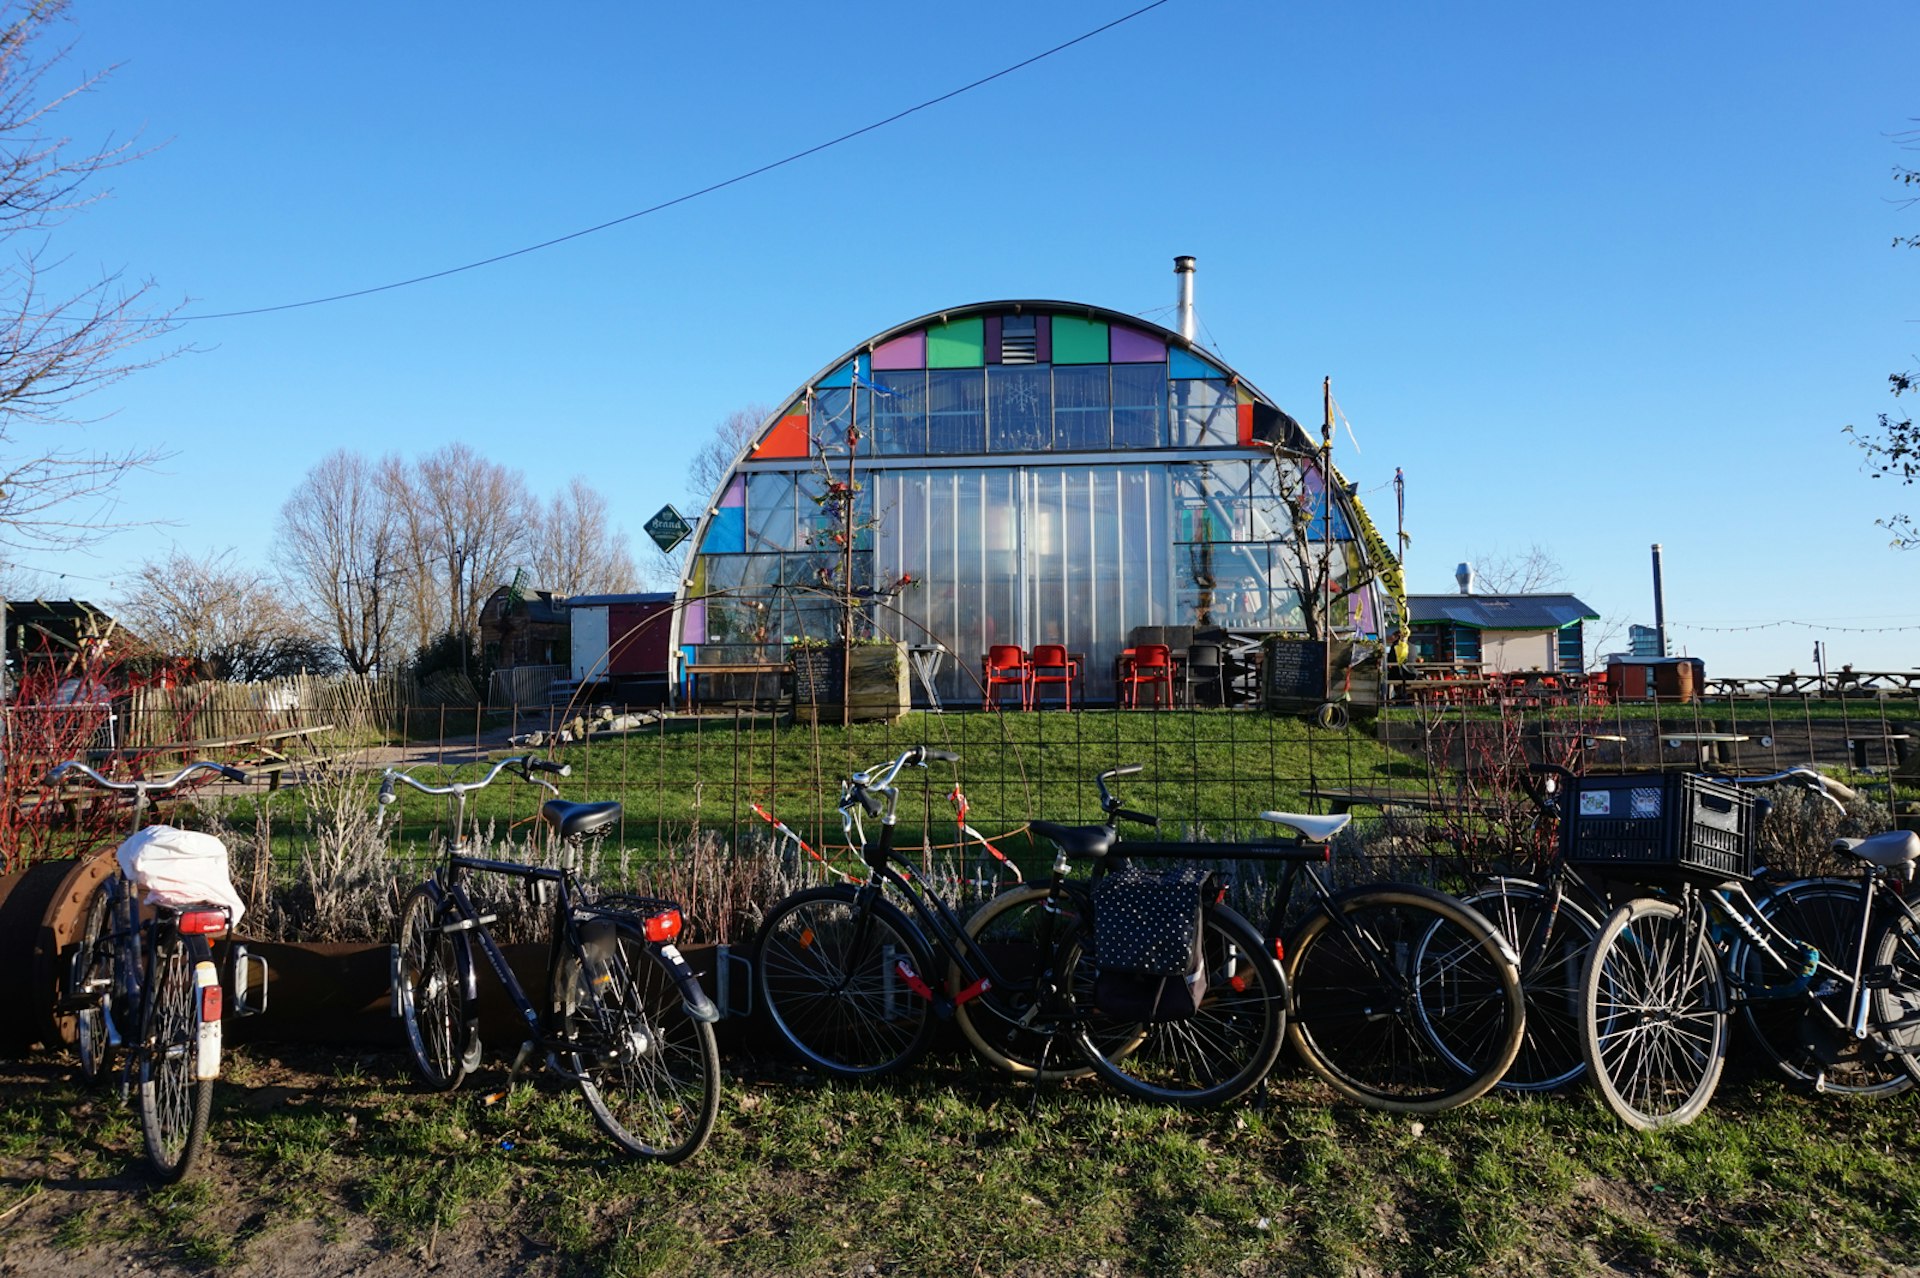 Bikes in front of Noorderlicht, a cafe housed in a building made of reused and sustainable materials